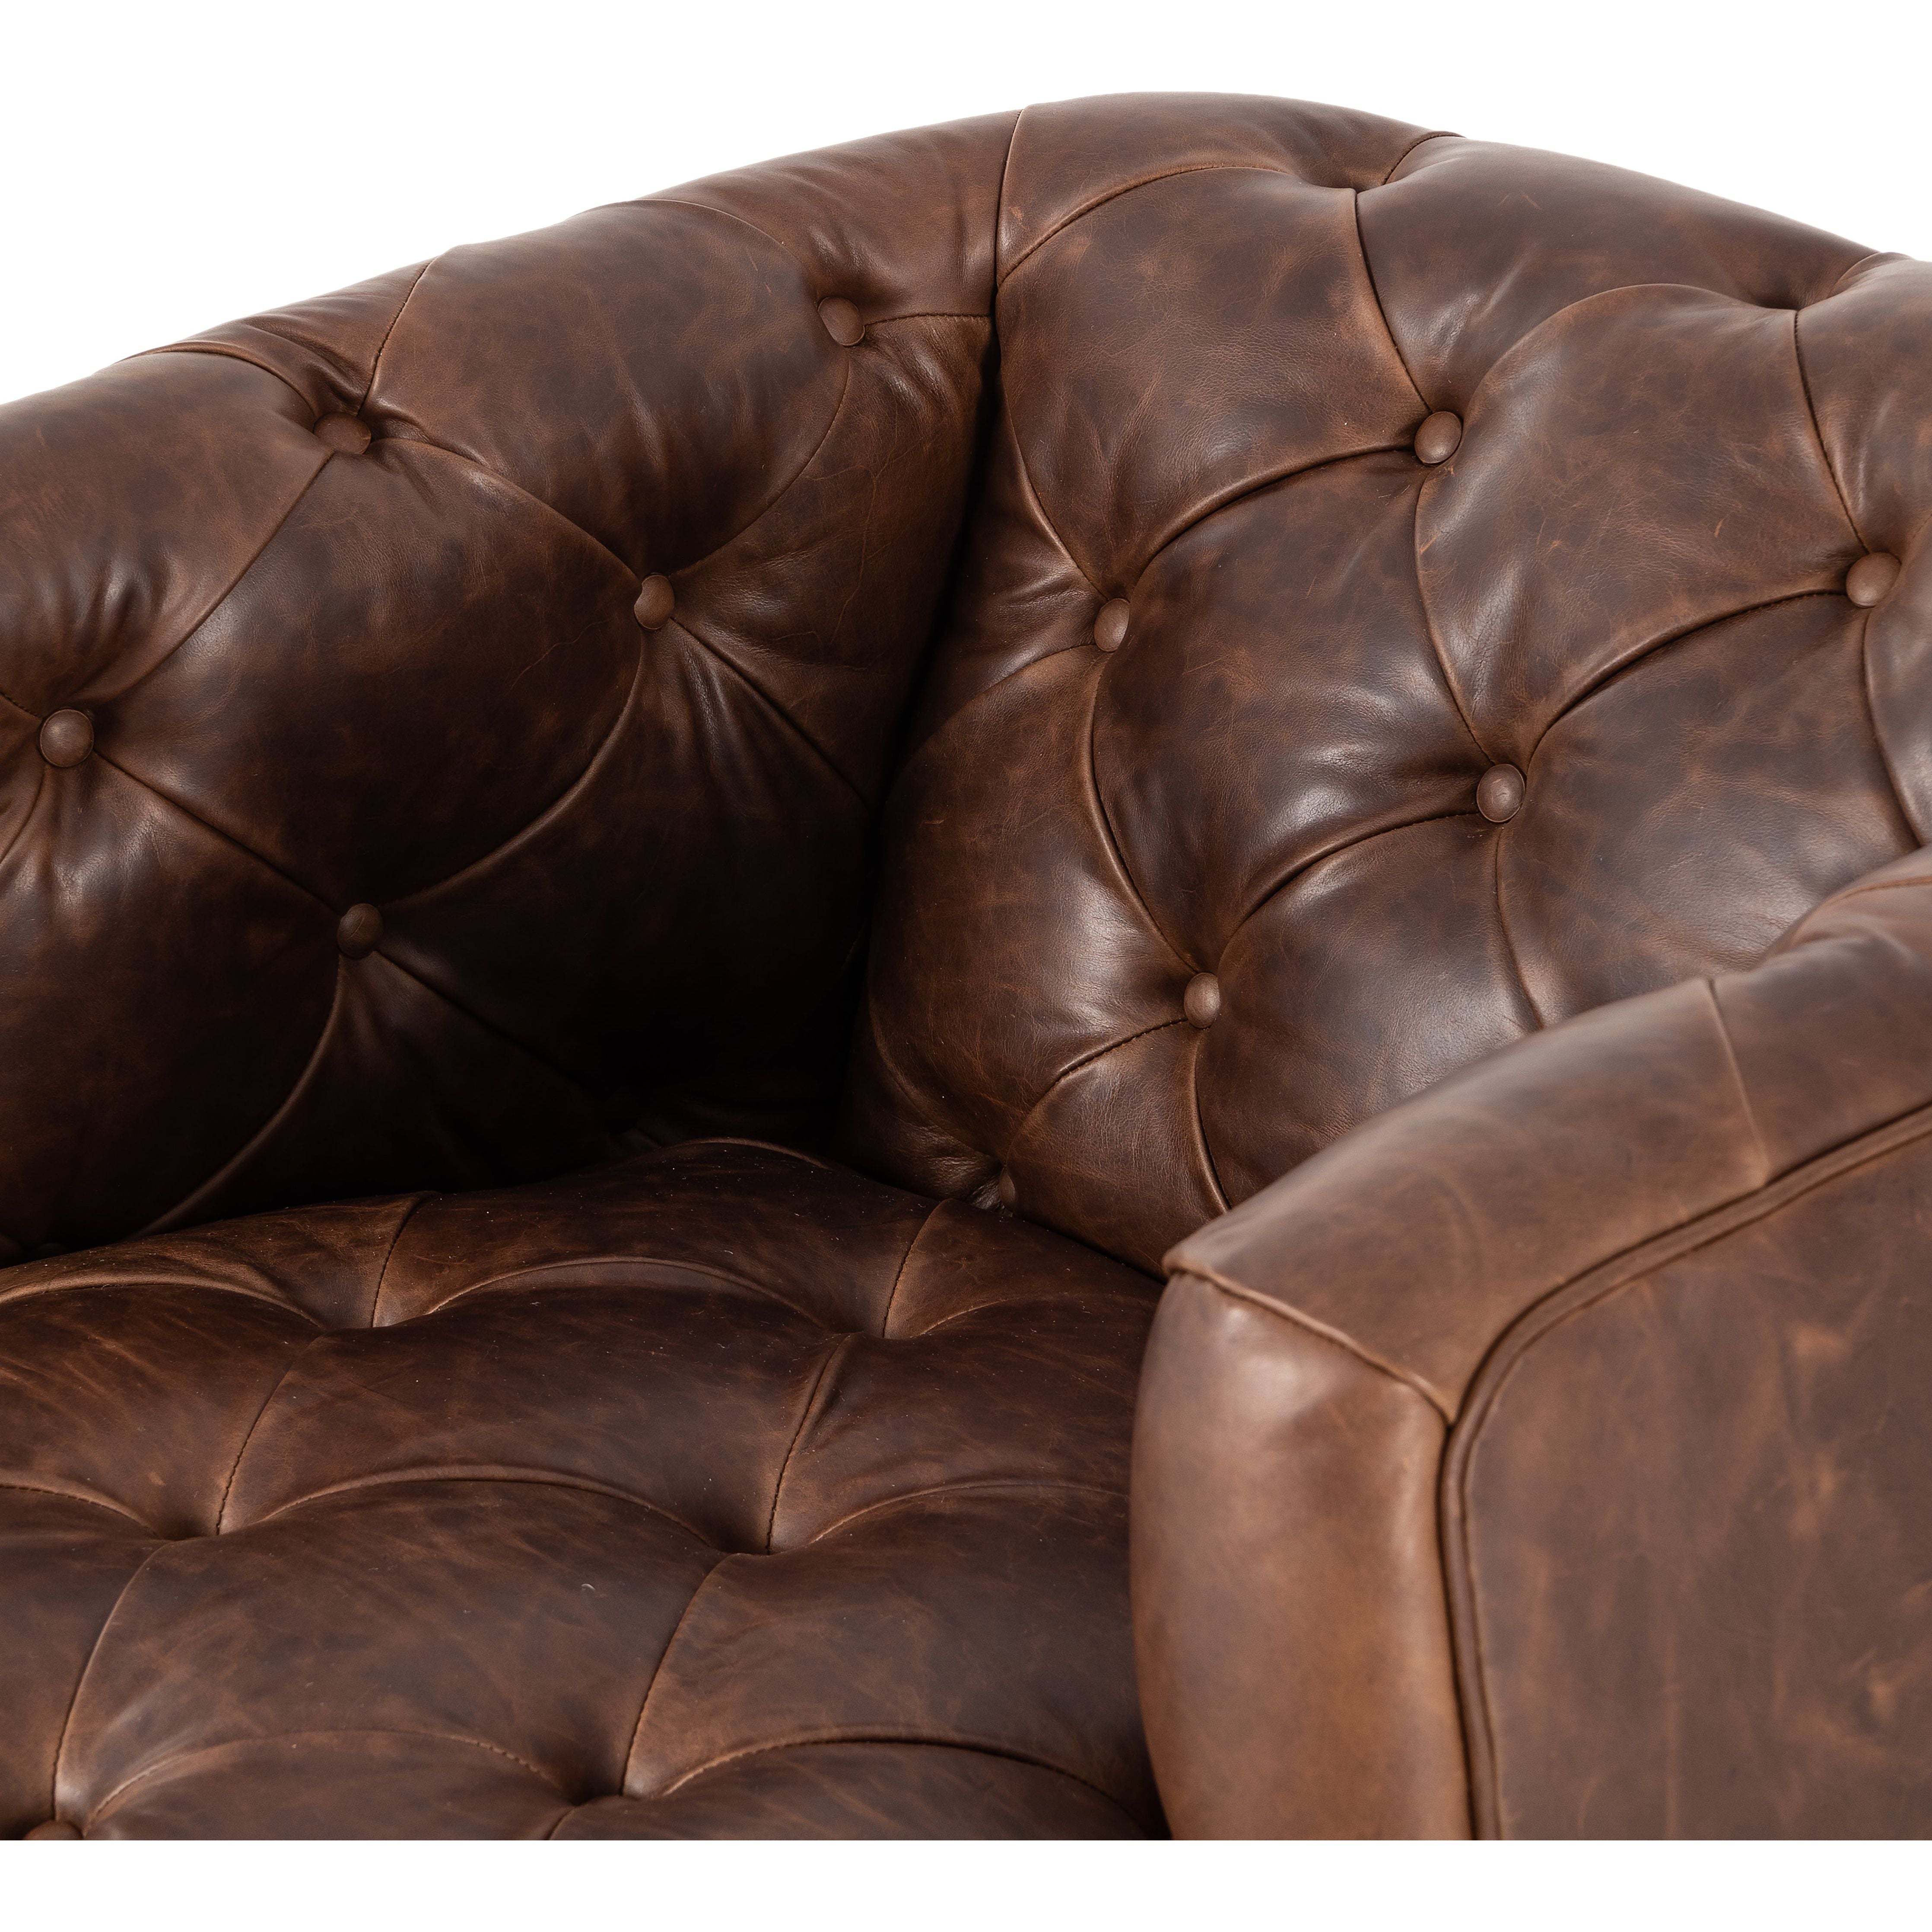 Old English-inspired top-grain leather is finished with a soft hand for a vintage, lived-in look on this traditionally inspired chair. Handcrafted in Italy, the richness of this distinctive, full-bodied leather develops an even-richer patina over time. Button tufting texturizes a comfortably curved back and sides, while a 360-degree swivel modernizes the whole look. Amethyst Home provides interior design, new construction, custom furniture, and area rugs in the Nashville metro area.